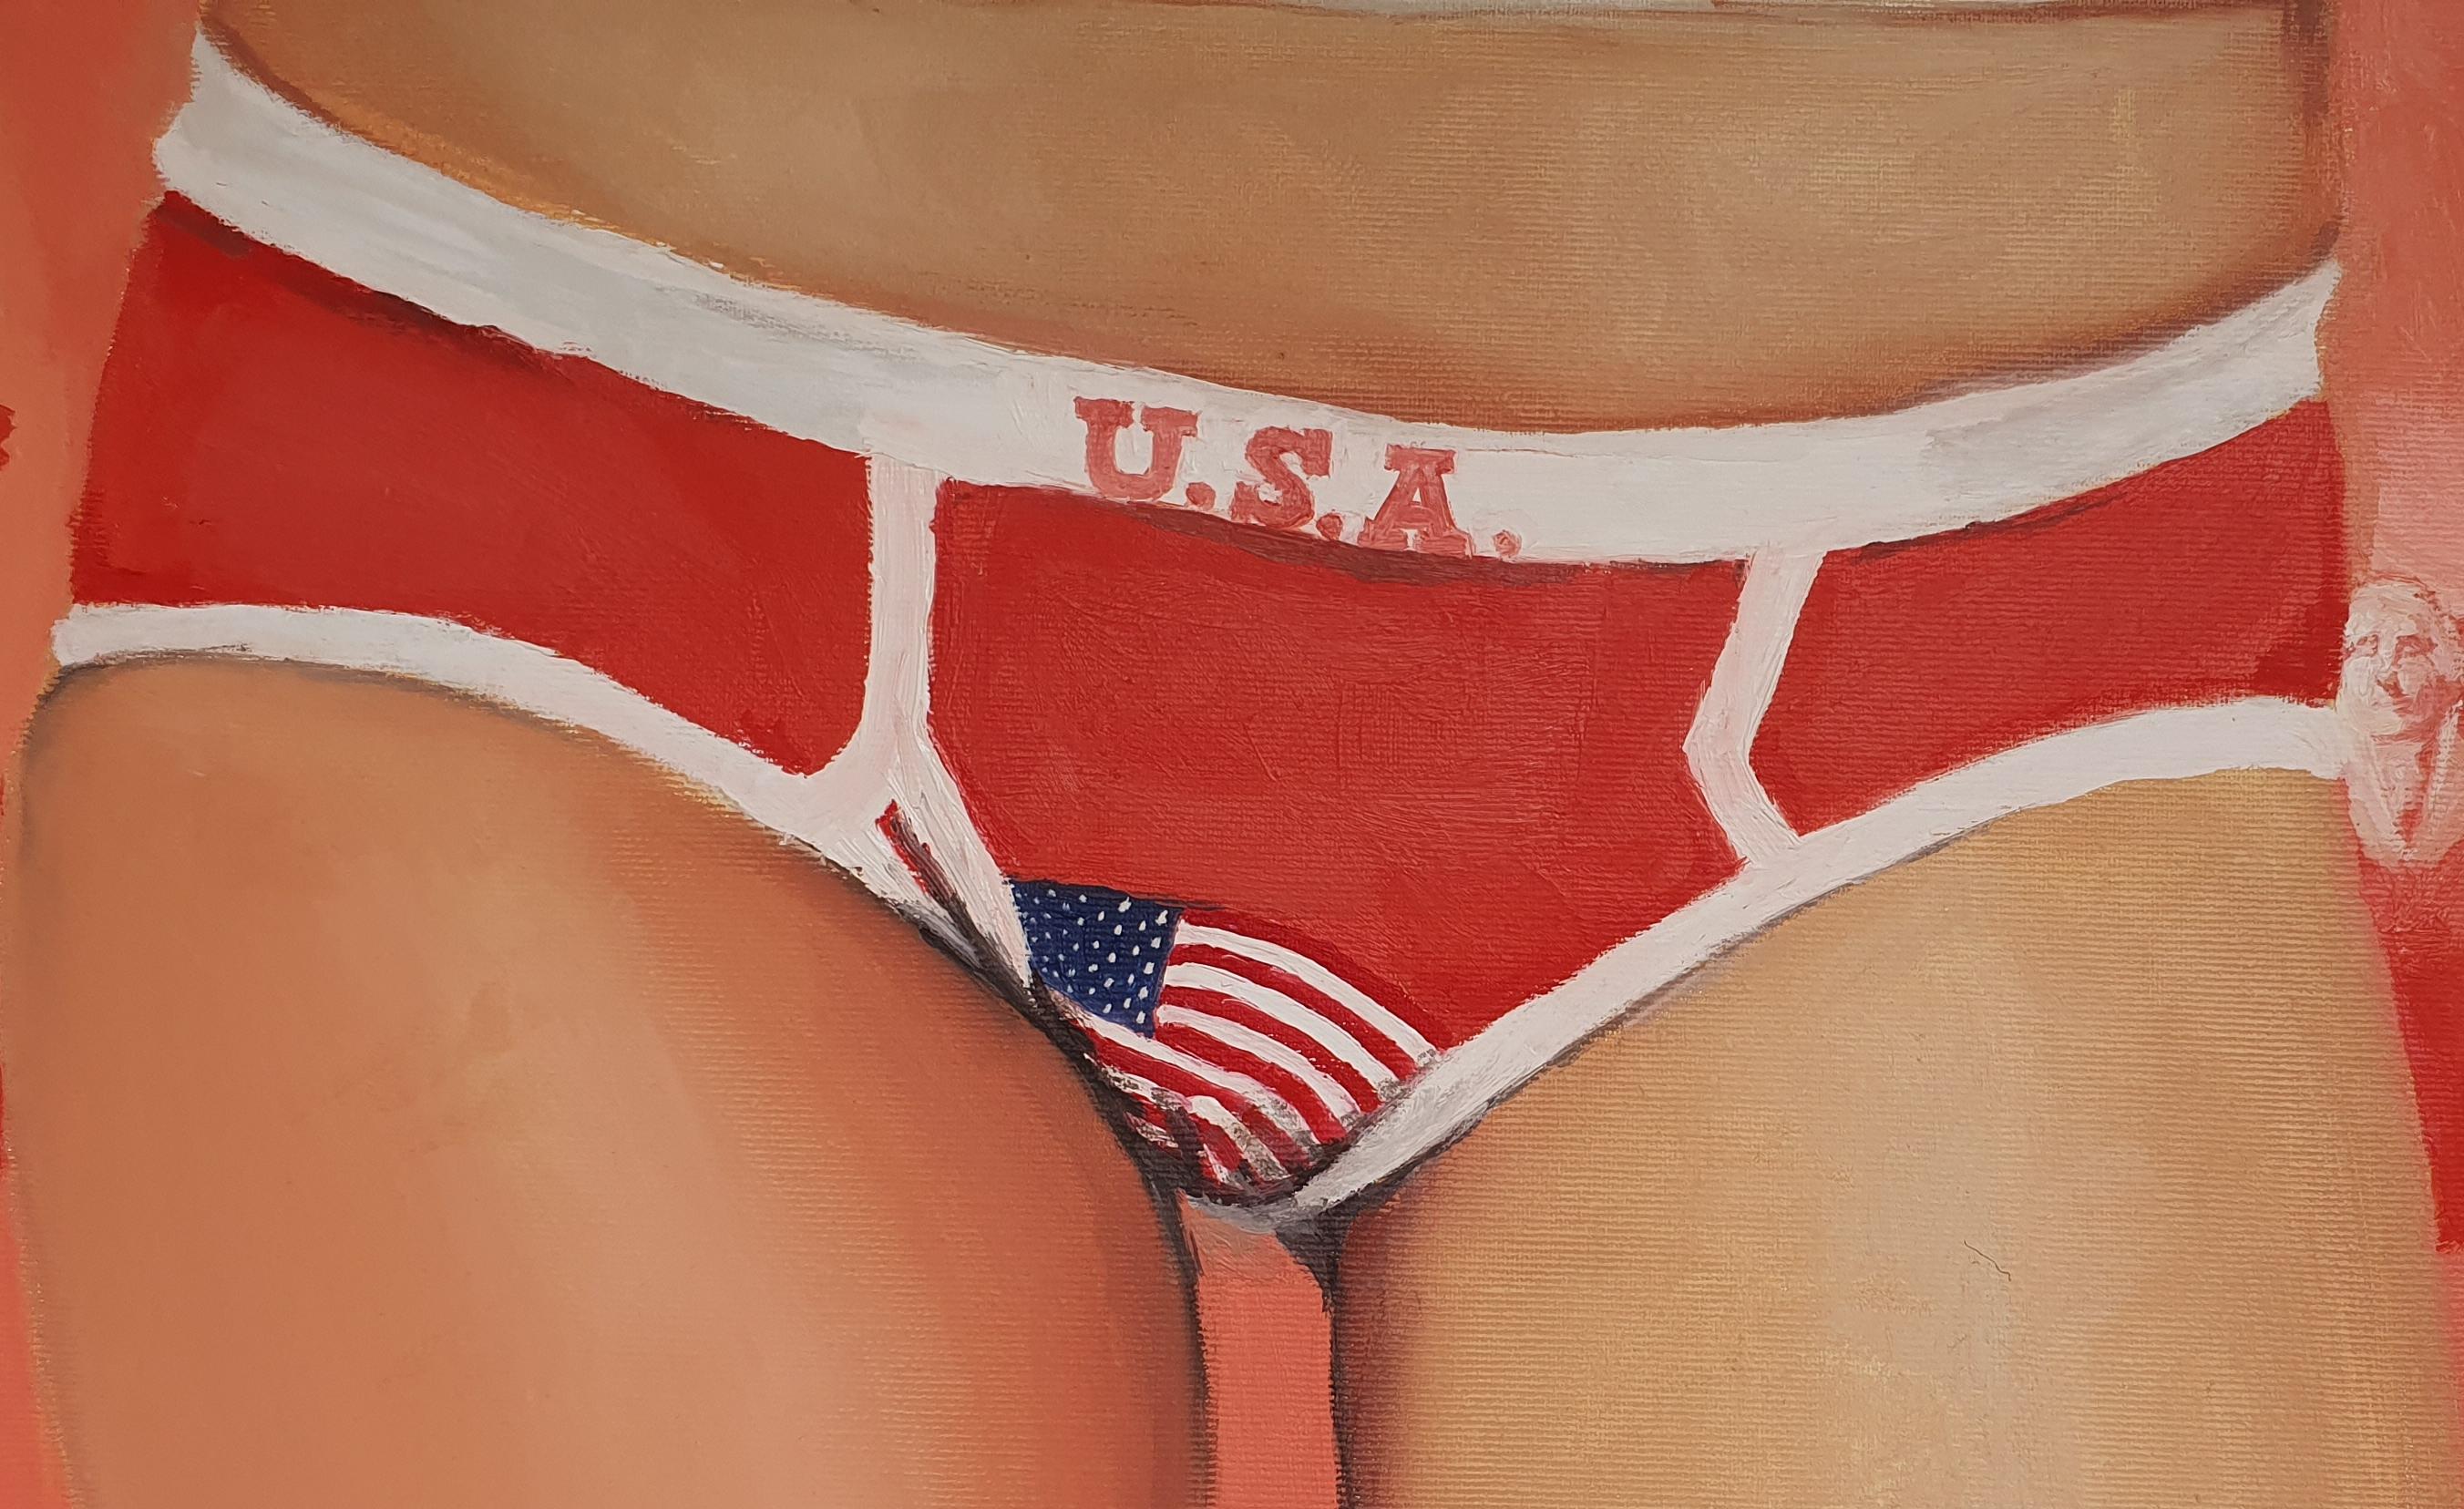 United States - Contemporary, Figurative Art, USA, Flag, Red, Statue of Liberty - Painting by Mihai Florea